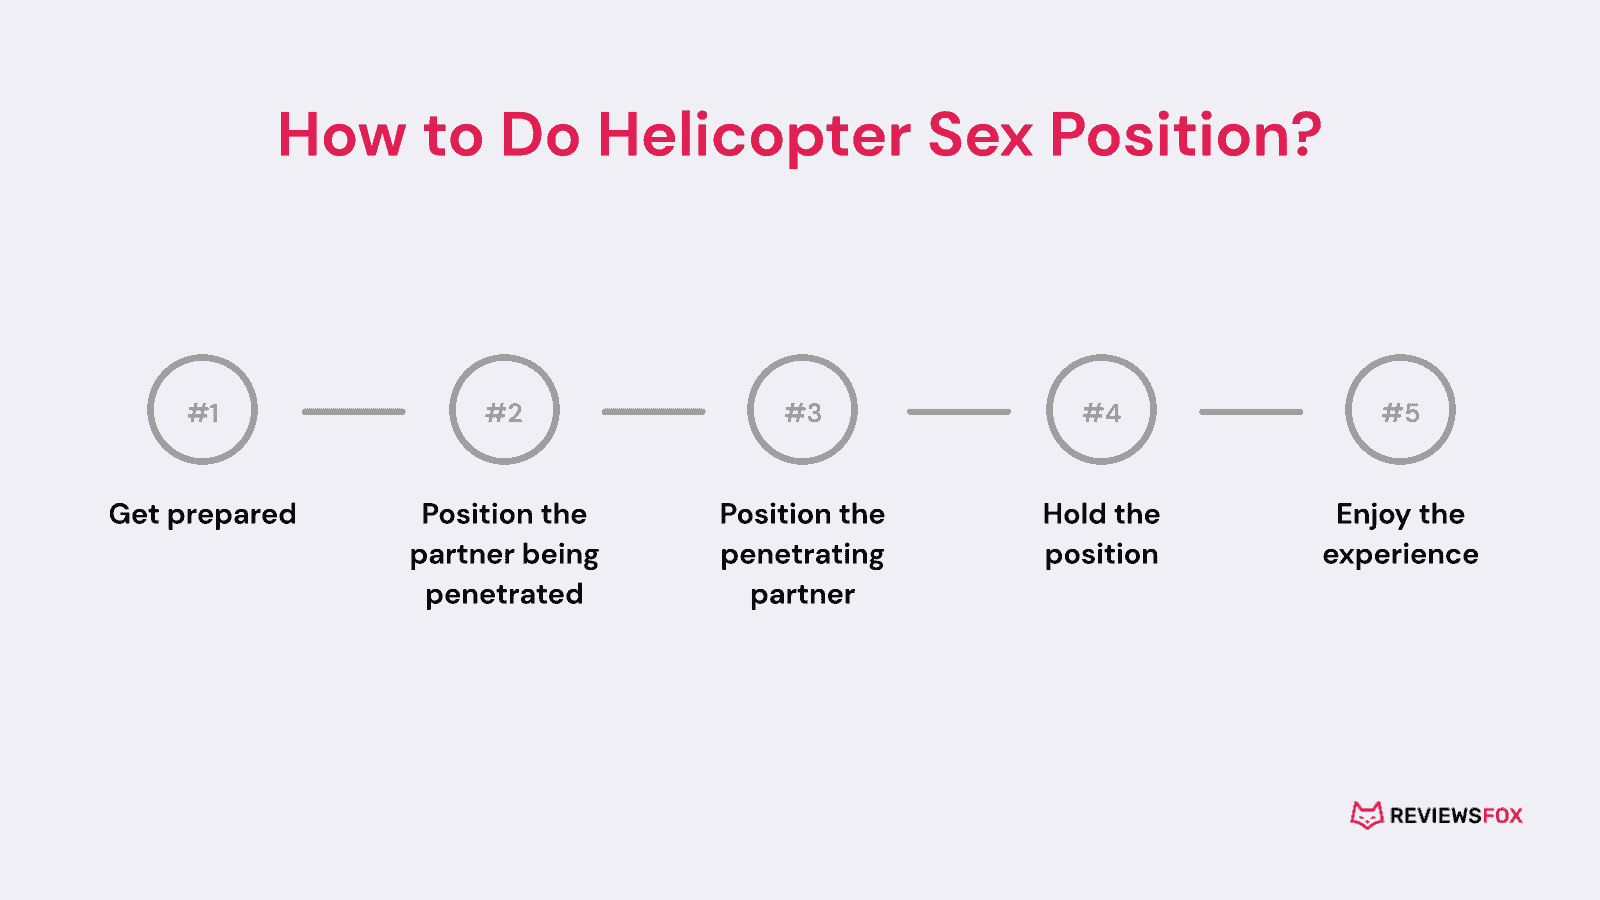 How to do Helicopter sex position